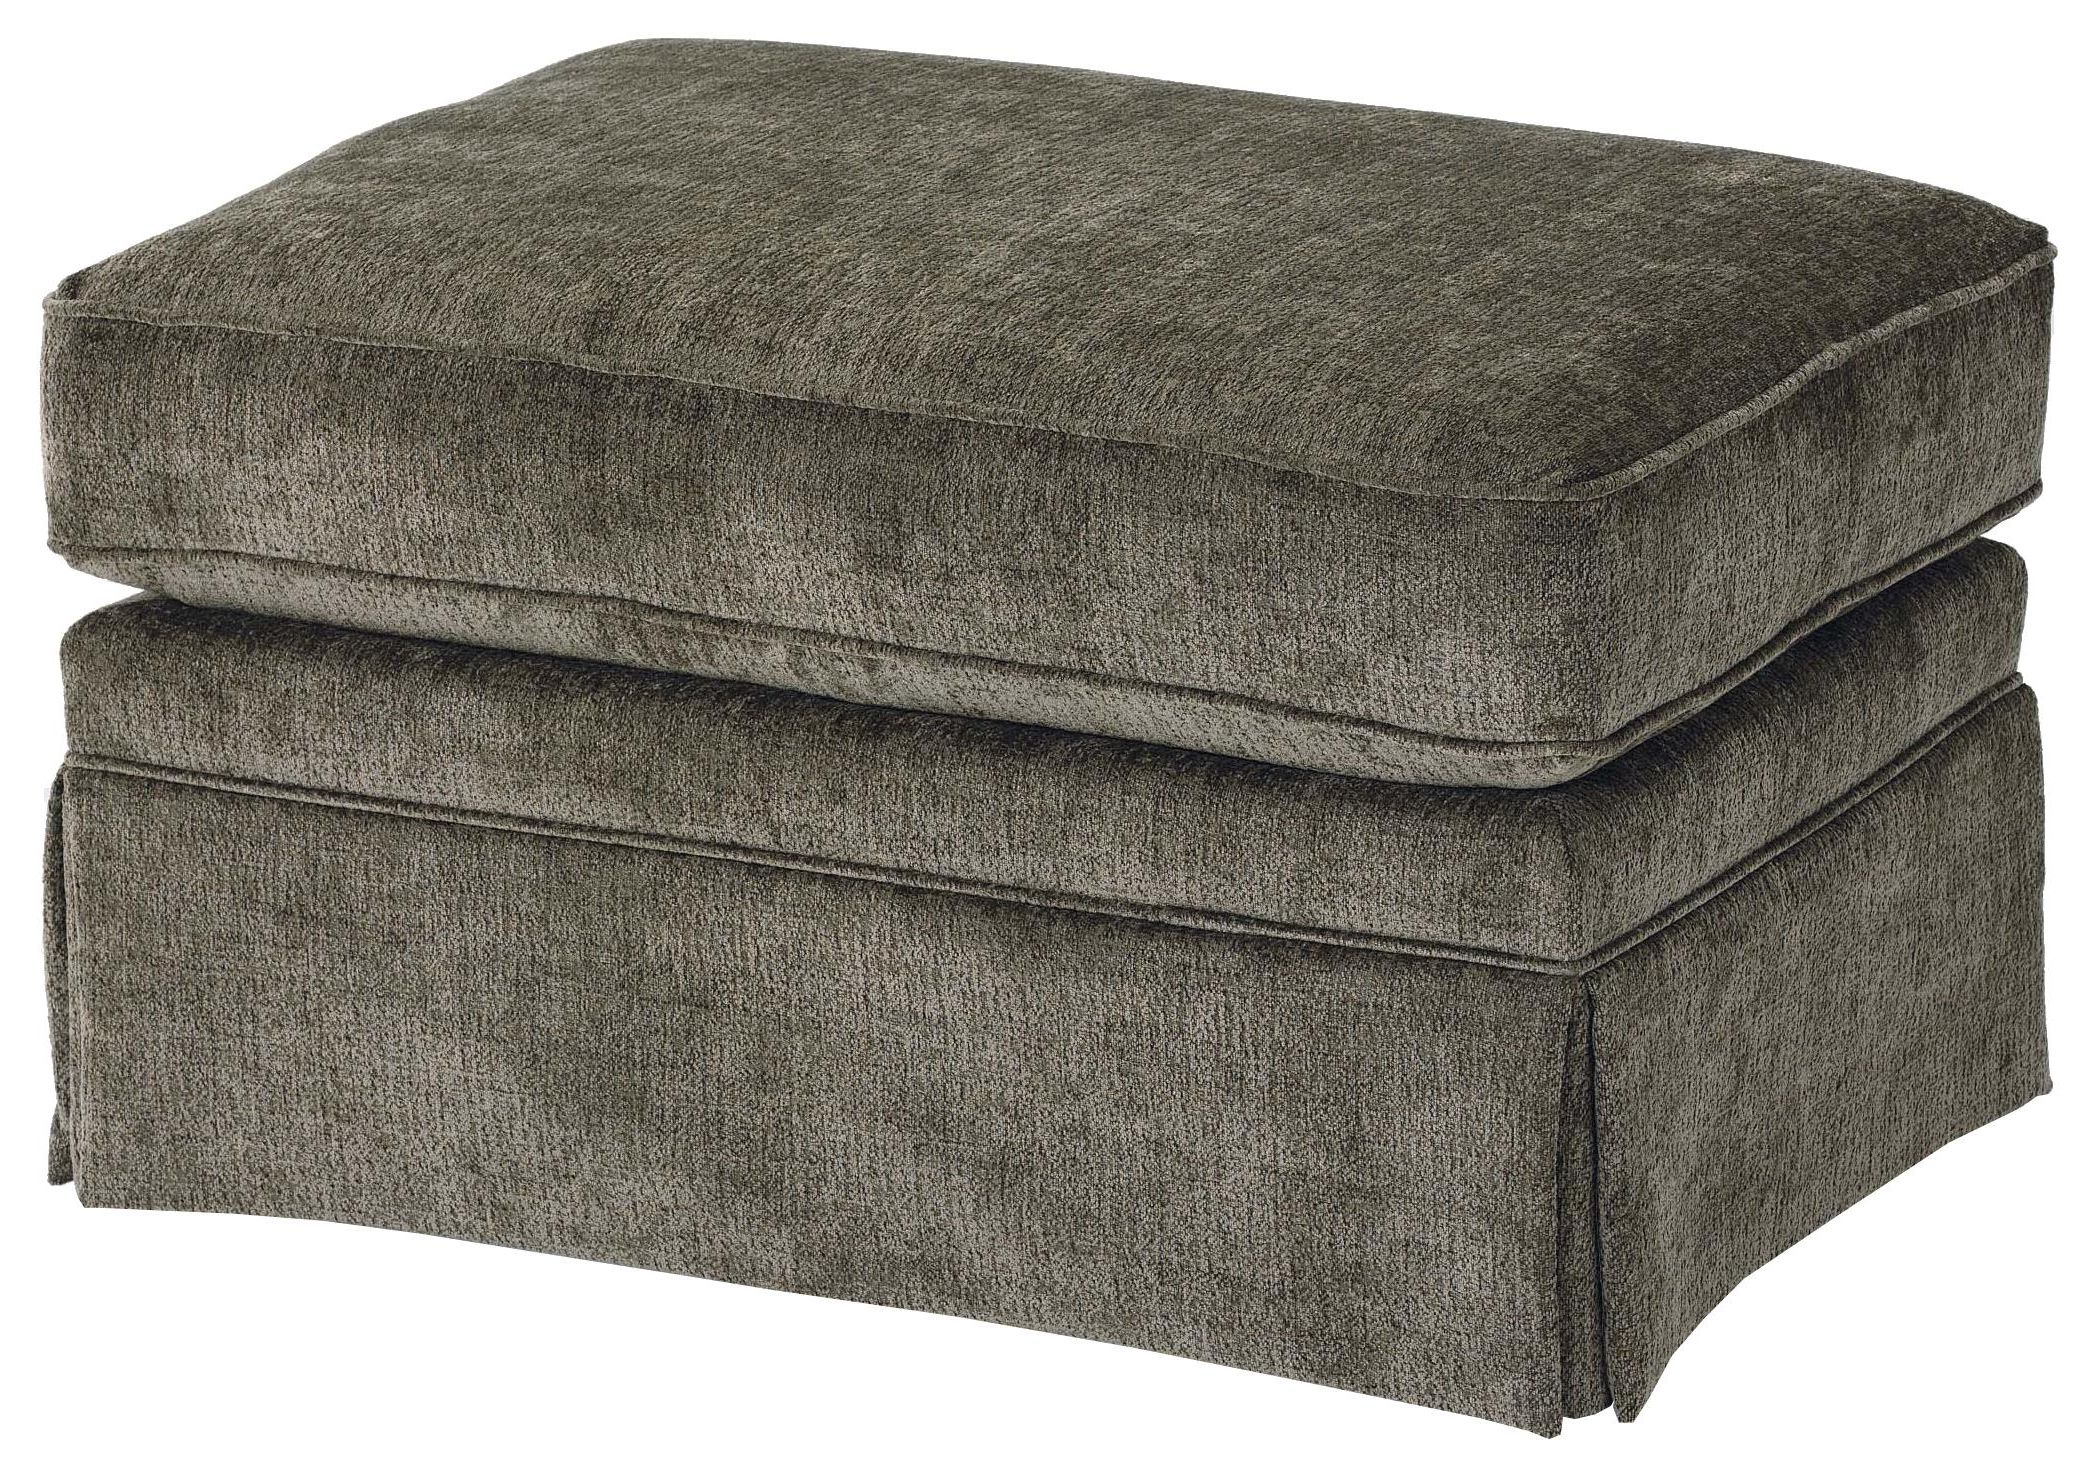 Gray And Cream Geometric Cuboid Pouf Ottomans With Regard To Most Up To Date Best Home Furnishings Ottomans Rectangular Ottoman Without Welt Cord (View 6 of 10)